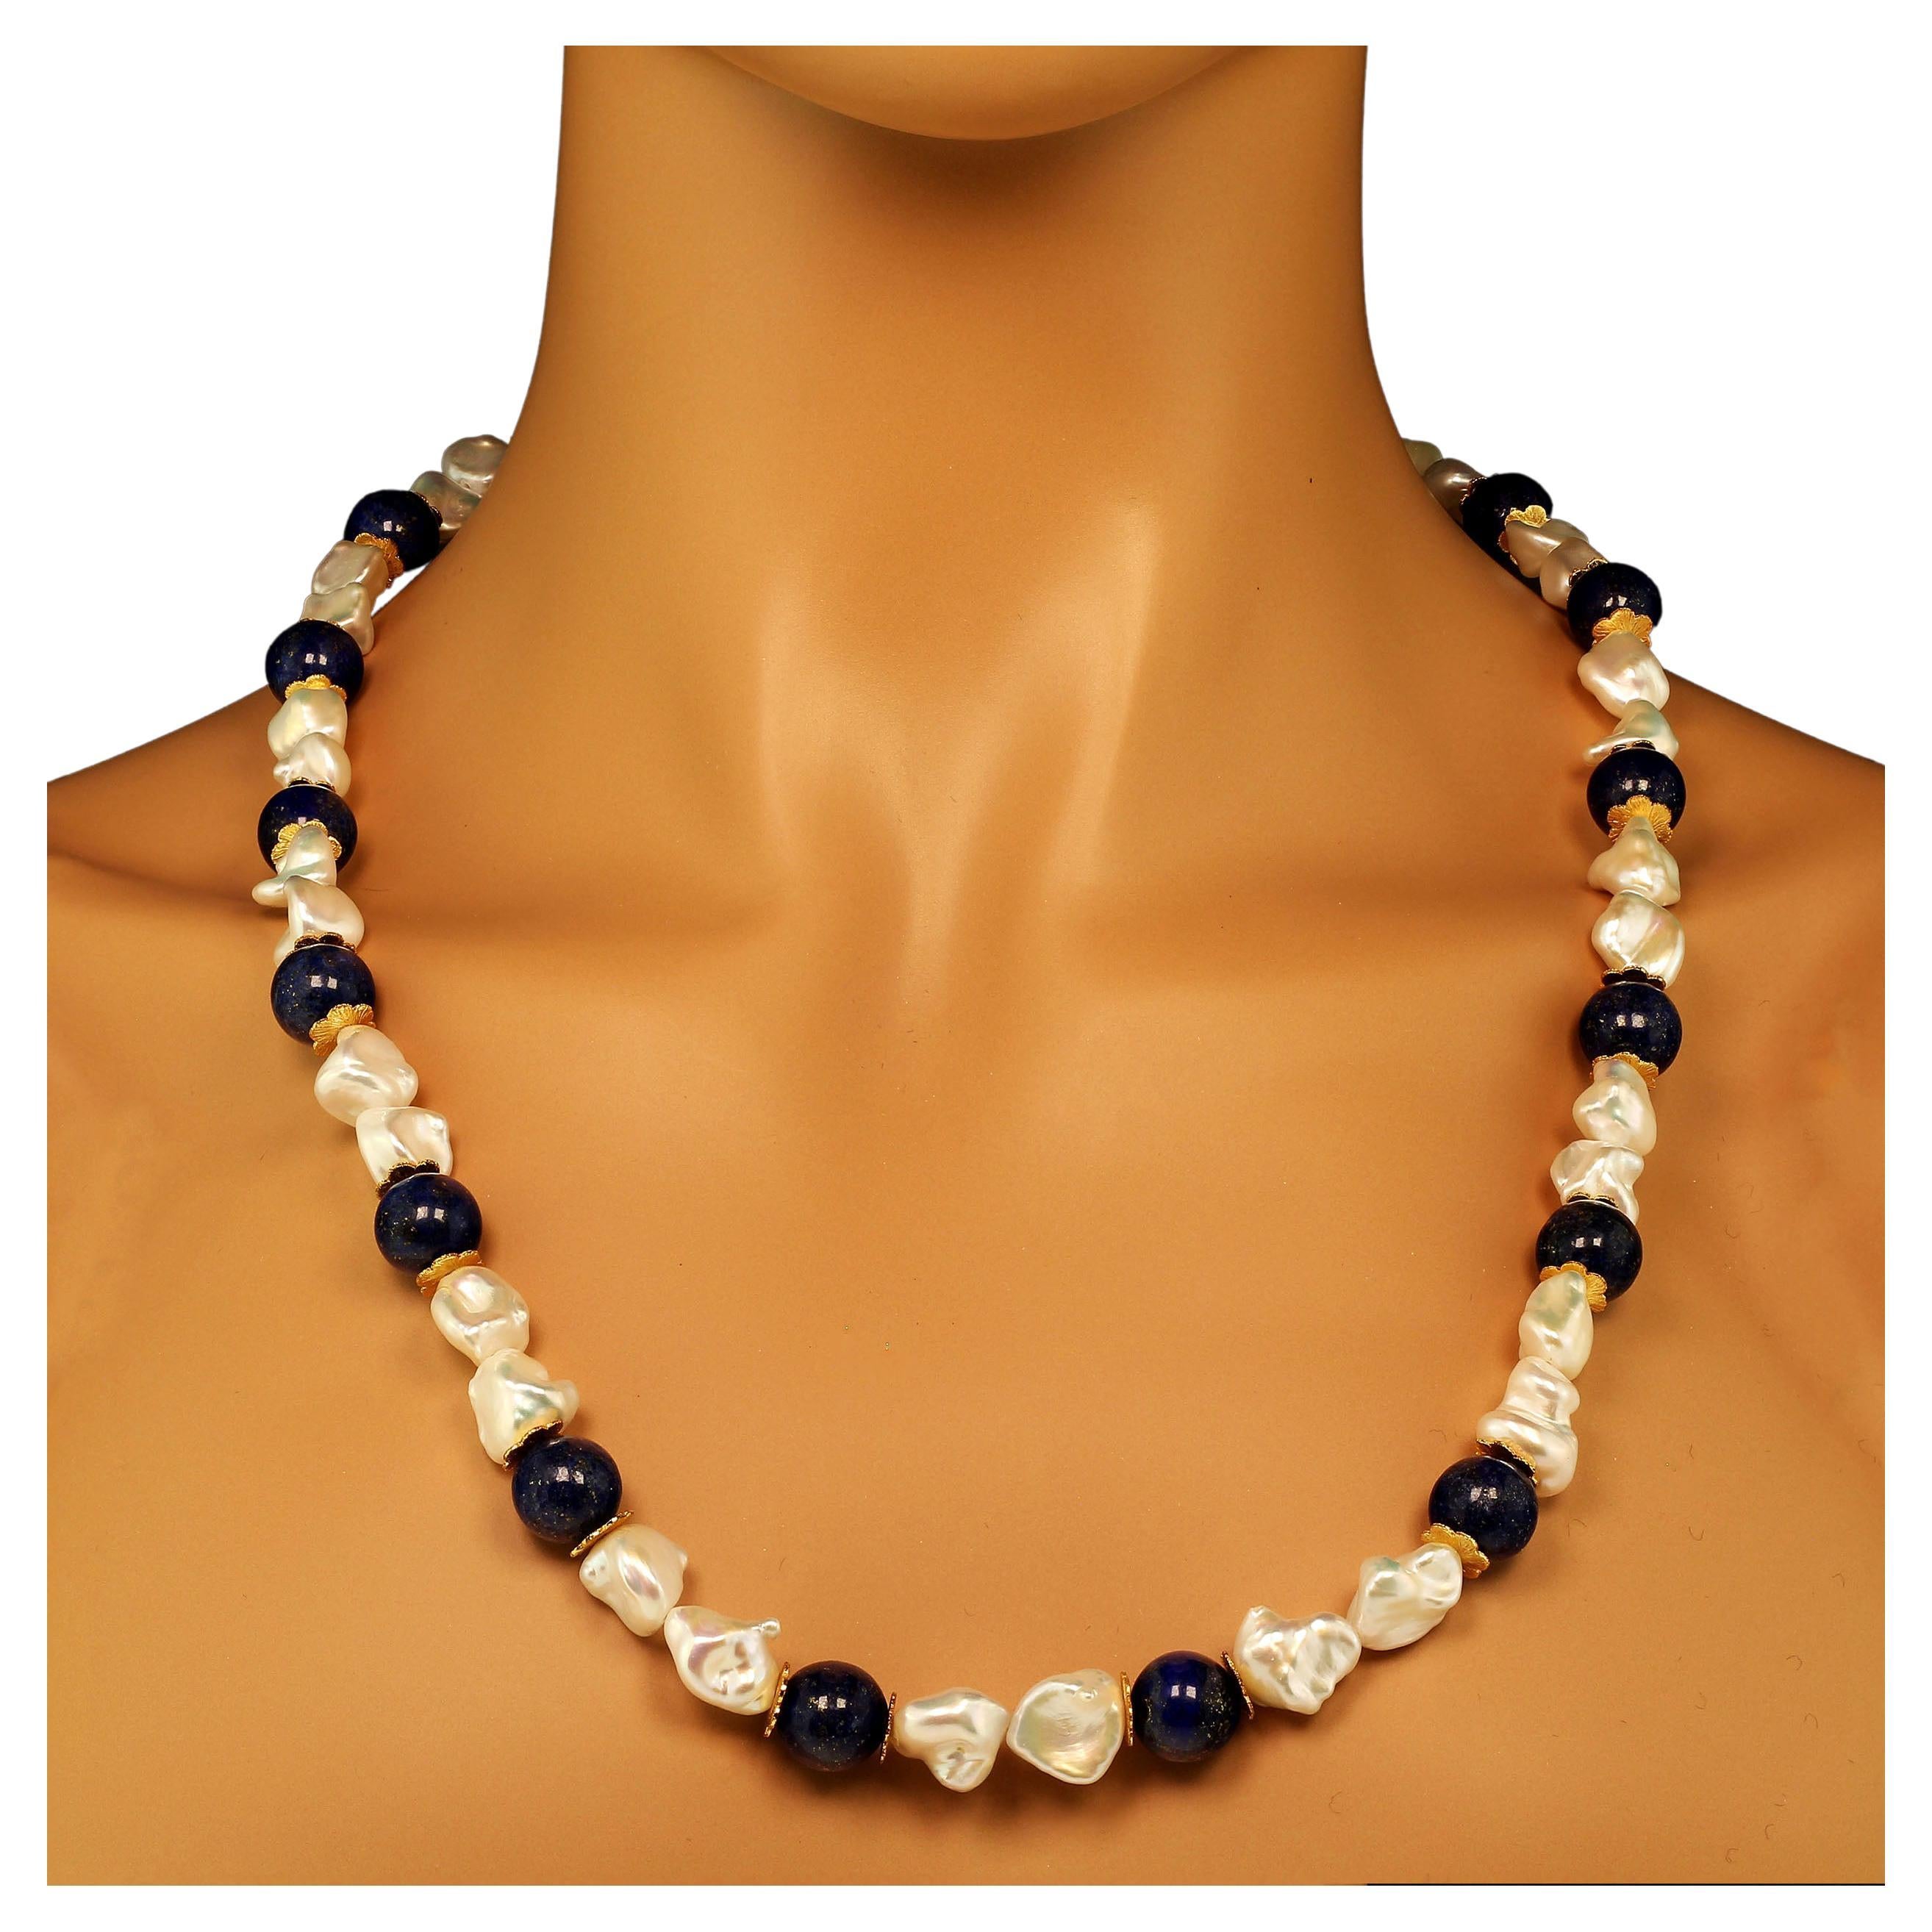 Own the jewelry you wish for

Custom made gorgeous white Keshi Pearl and Lapis Lazuli (12MM) Necklace with goldtone flutters for accents. These unique iridescent pearls flash yellow and pink from their gentle folds.  They are beautiful complements